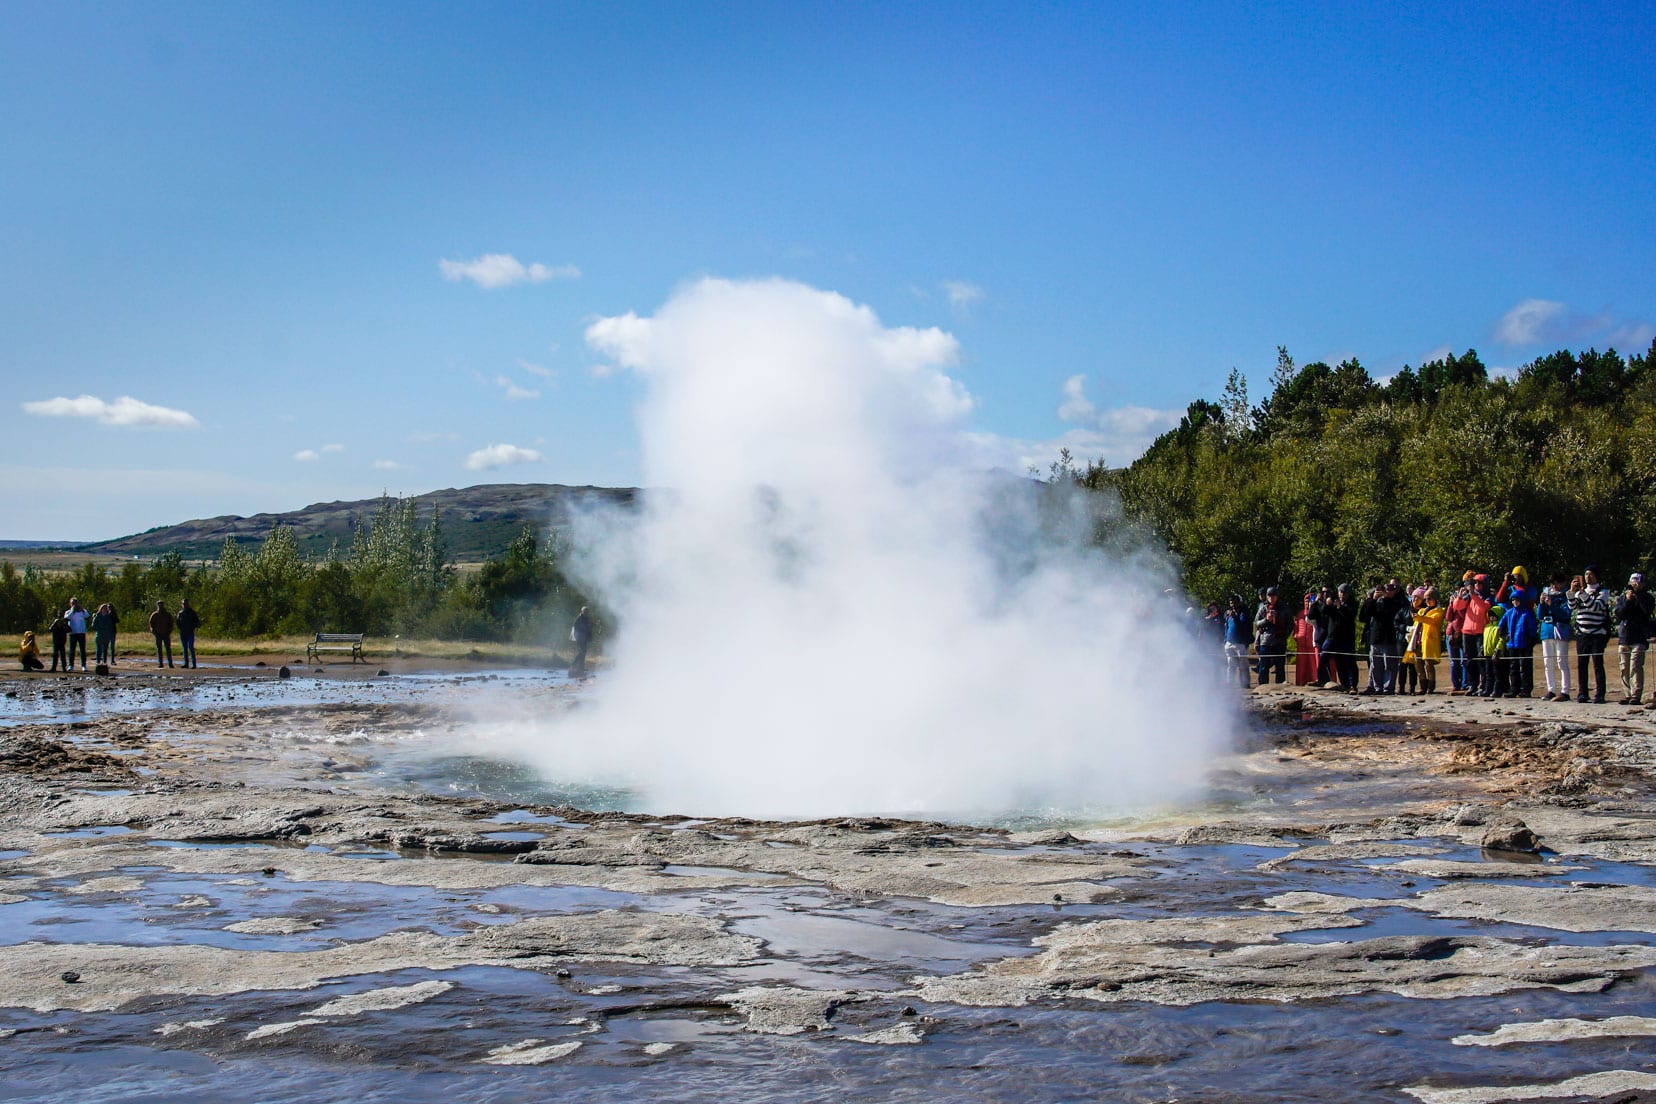 Geyser spurting up into the air in Iceland